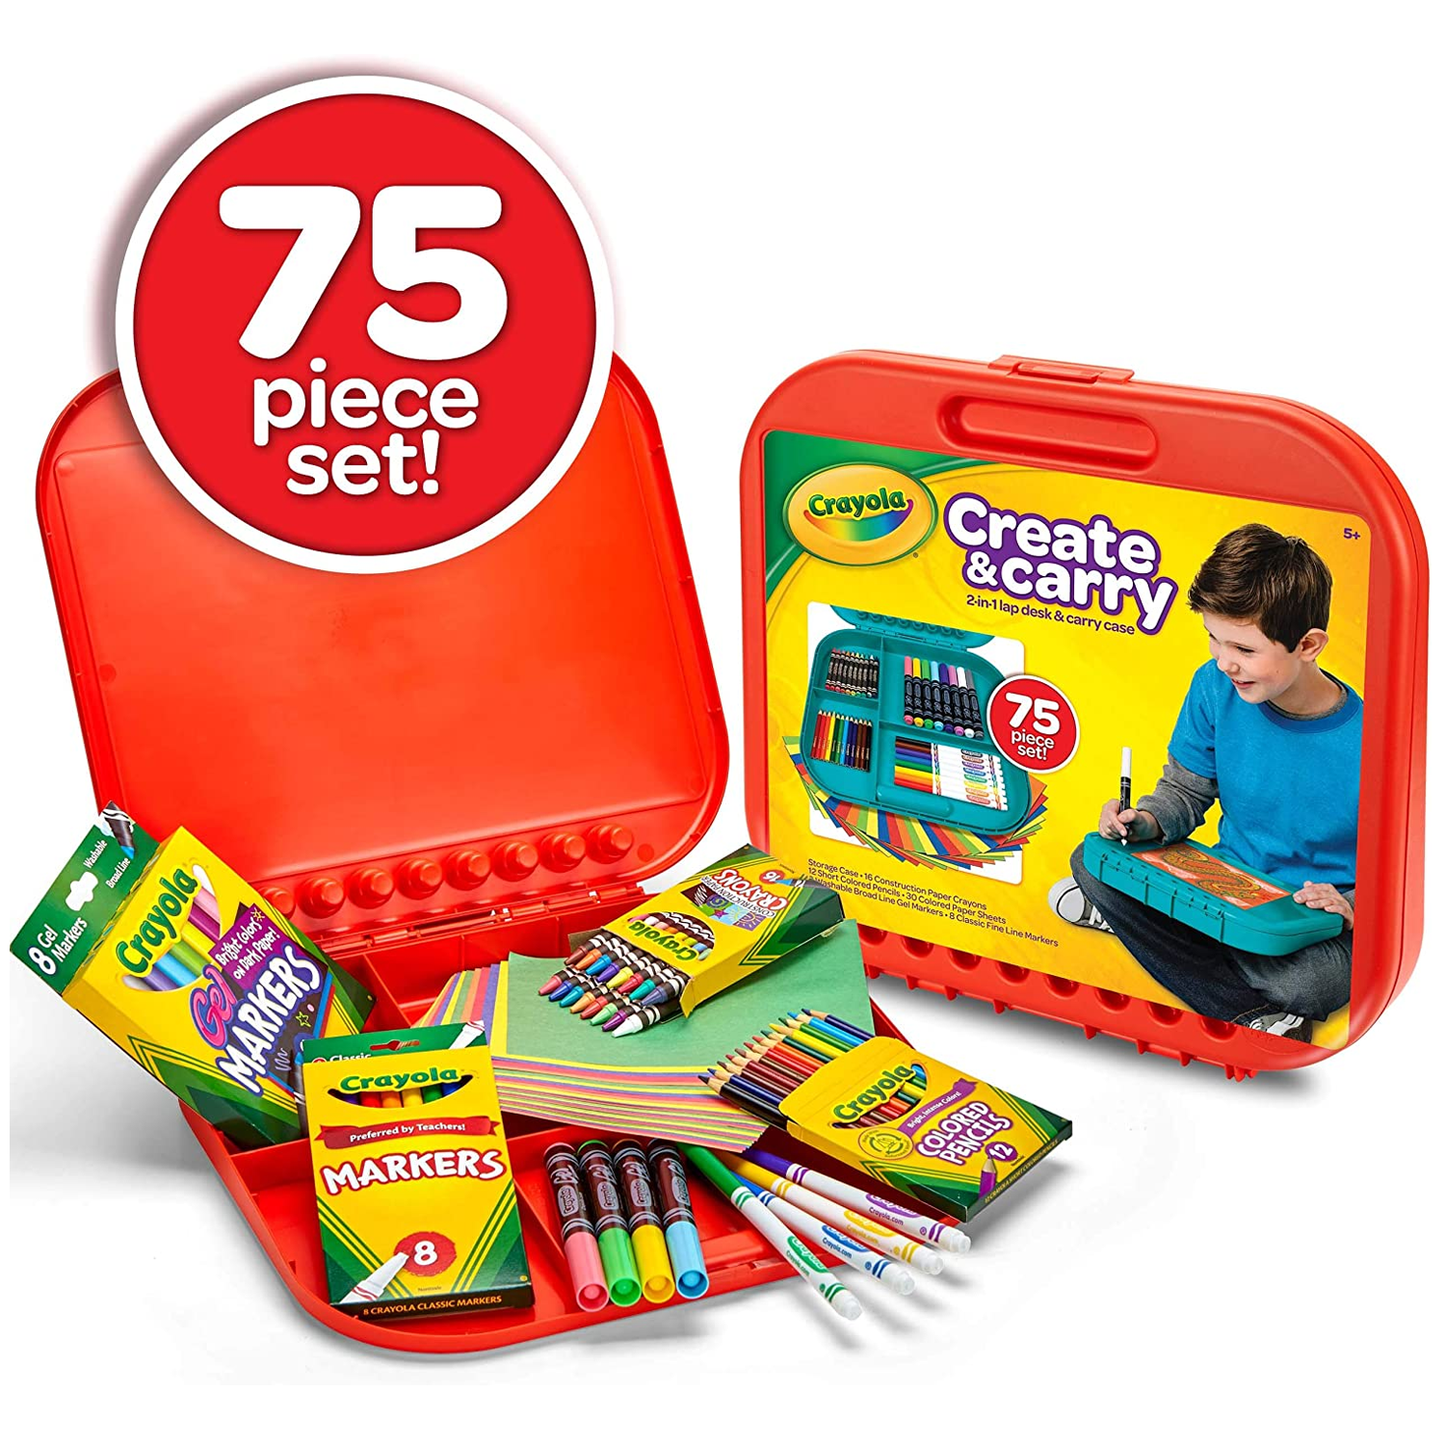 Crayola Create and Carry Case